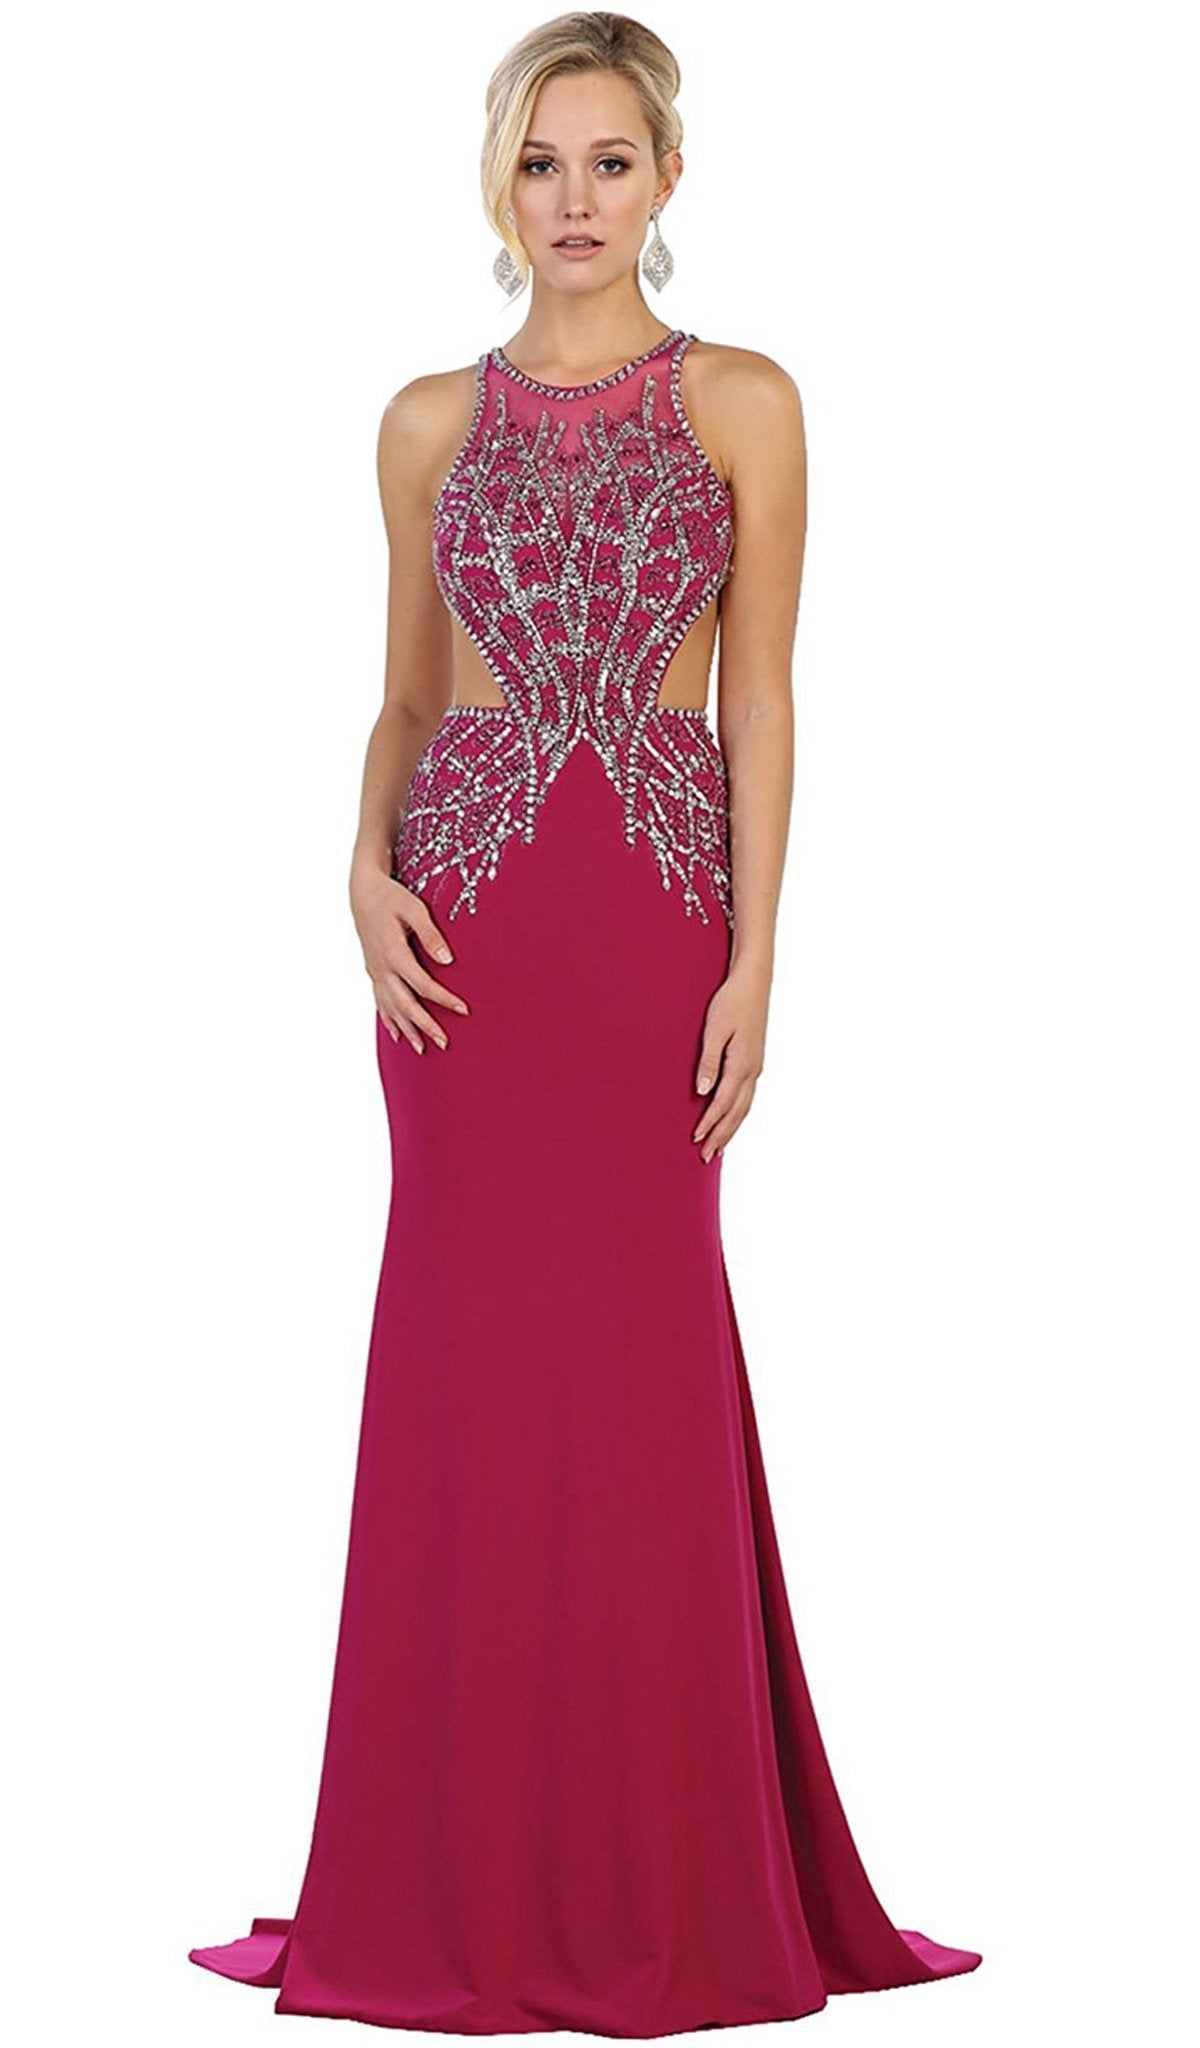 May Queen - Bejeweled Illusion Halter Sheath Evening Dress Special Occasion Dress 2 / Magenta